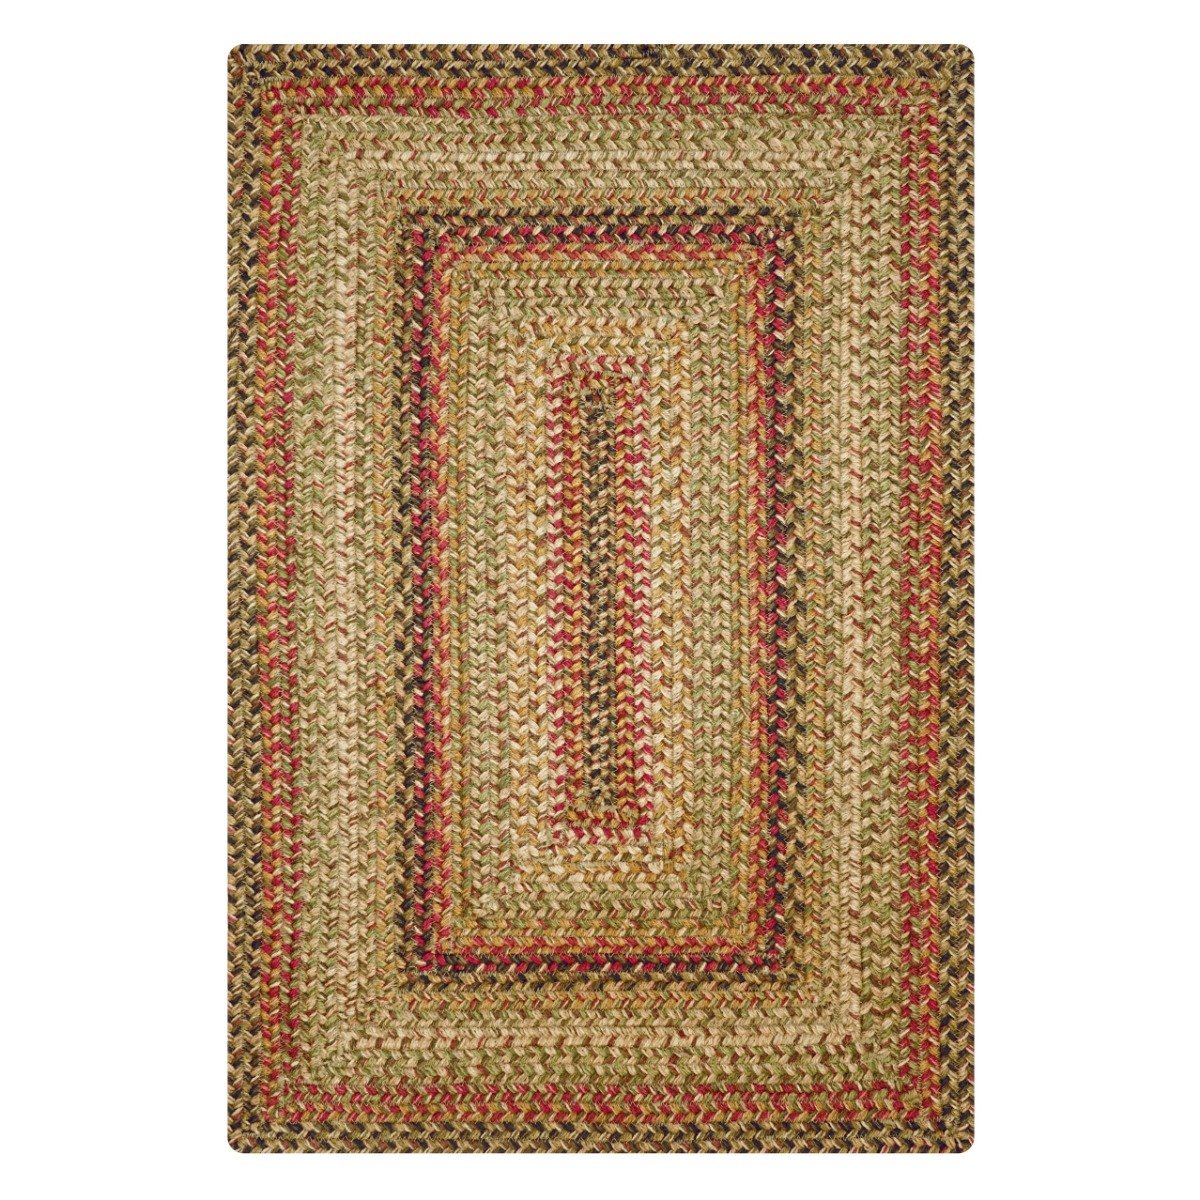 Homespice Decor Jute Braided Kingston Beige Rug – Rugs Done Right